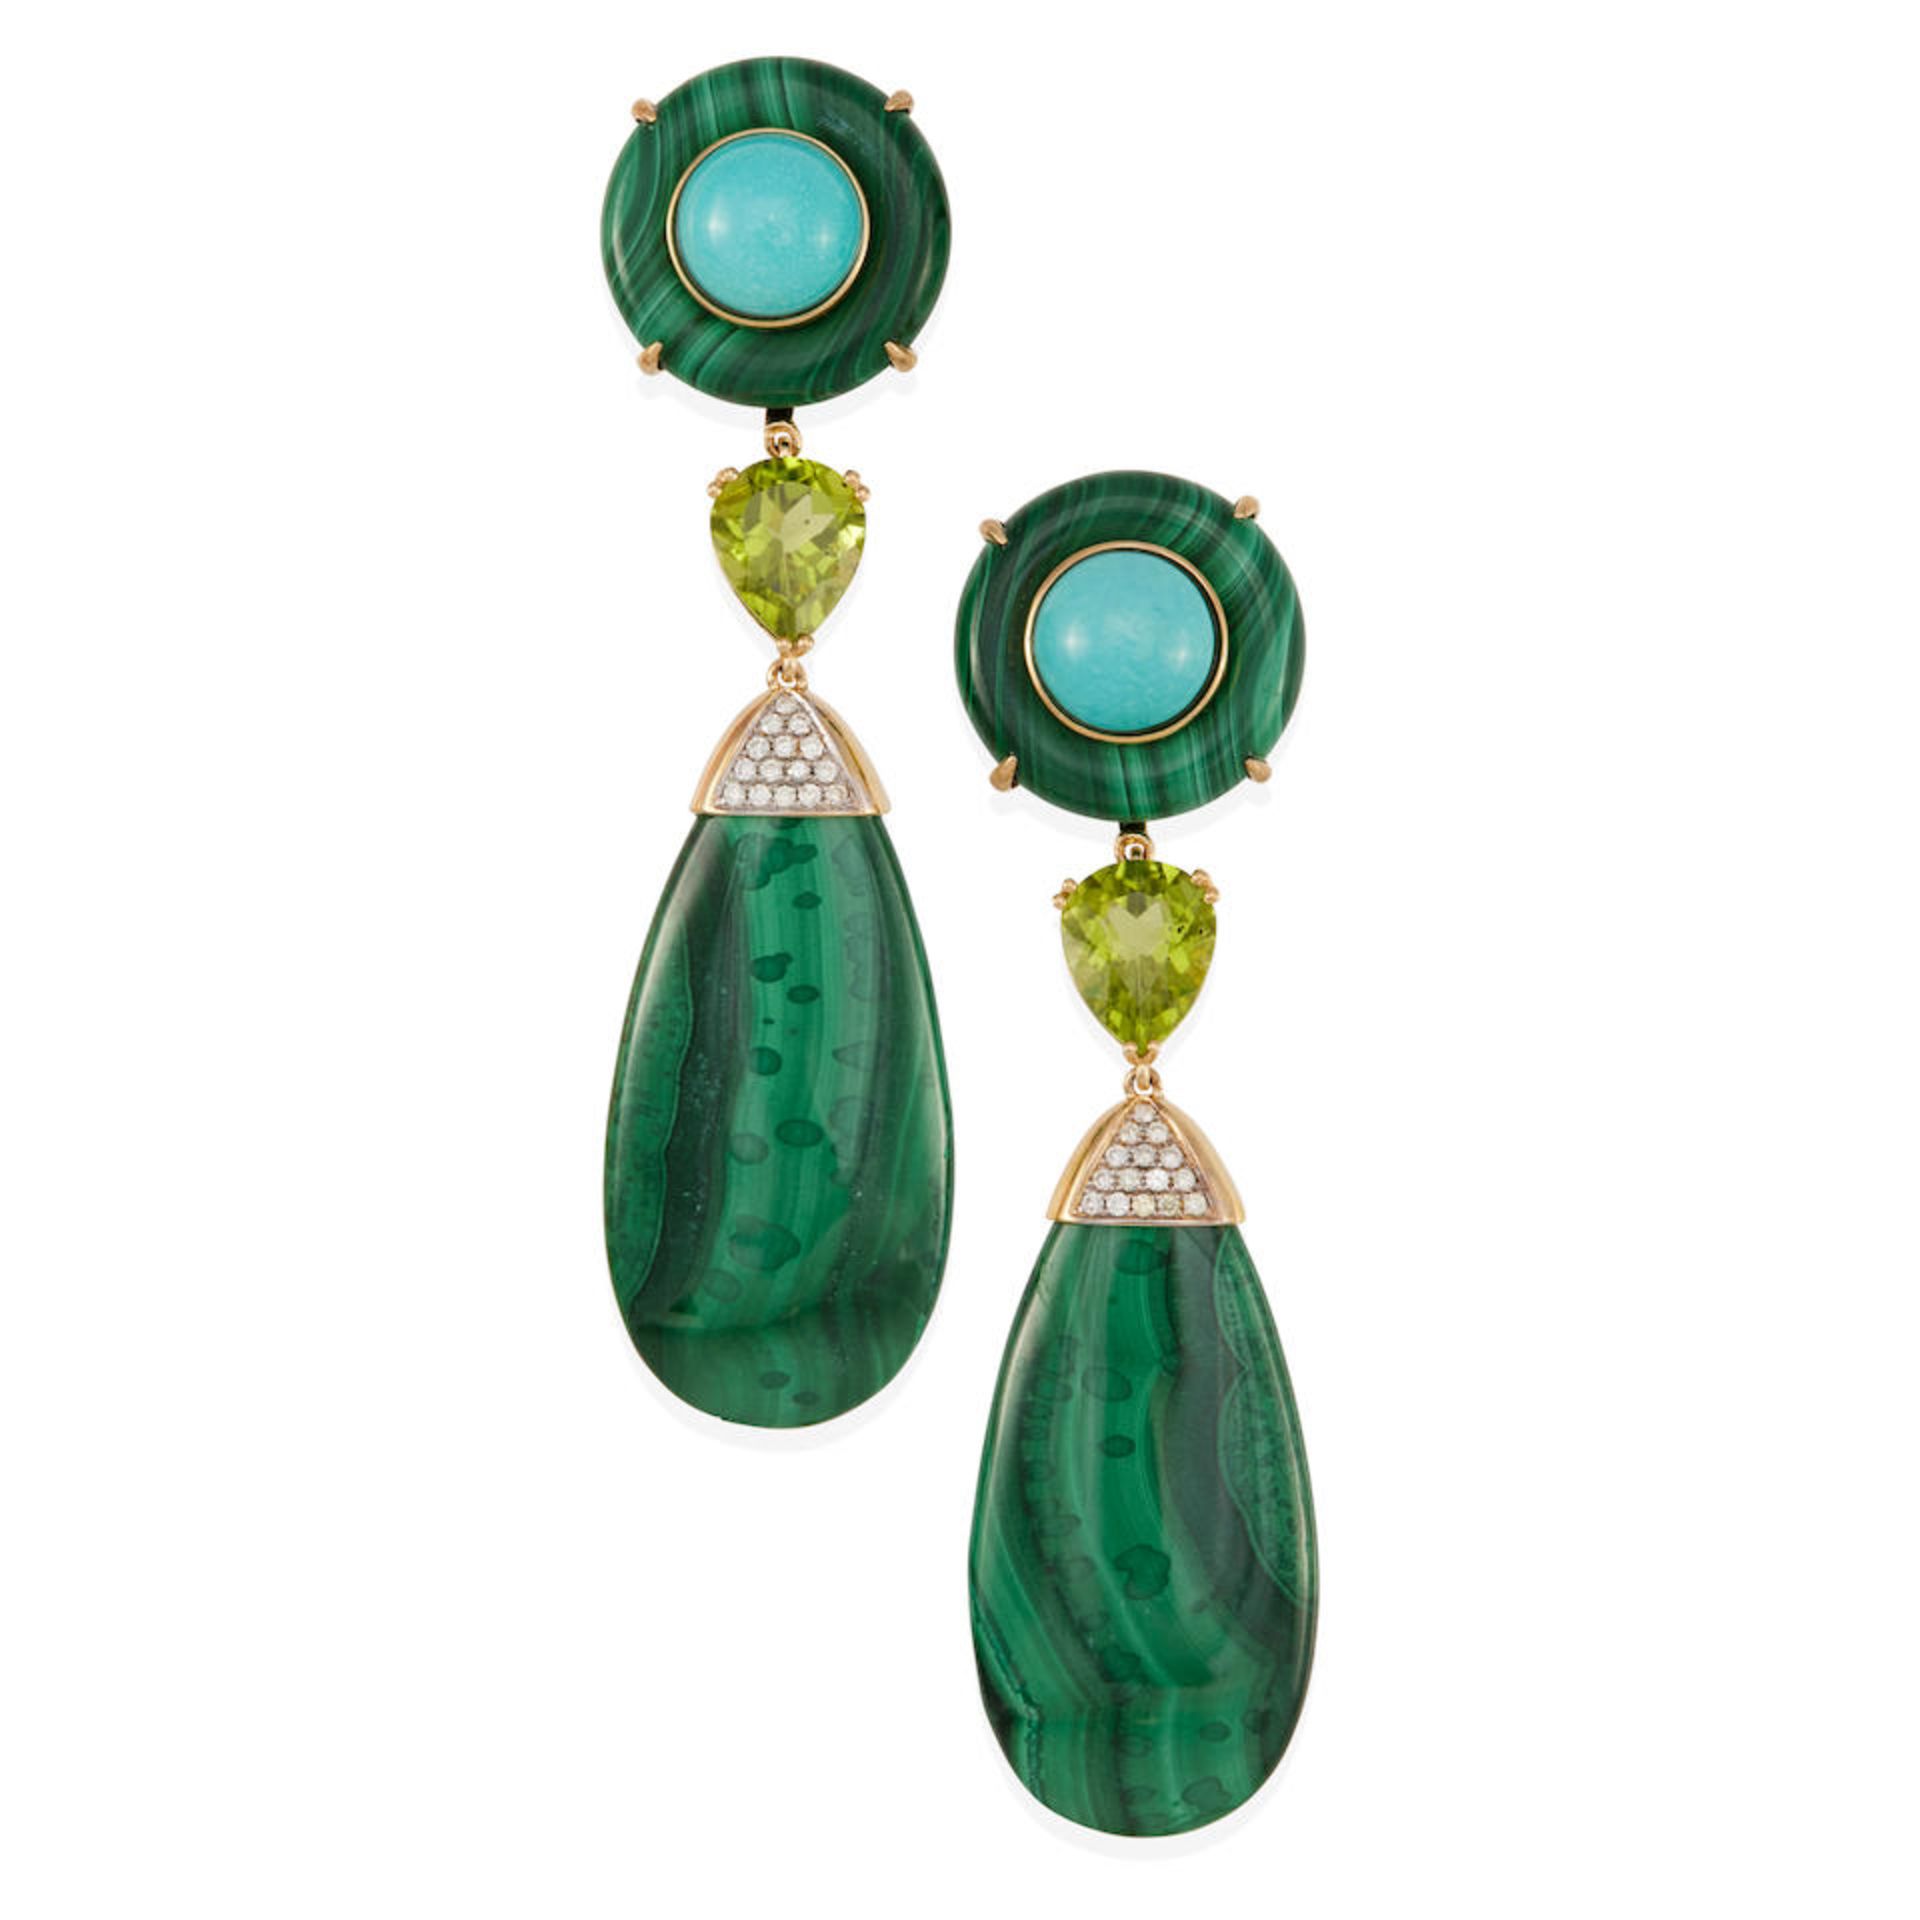 A PAIR OF 18K GOLD, MALACHITE, TURQUOISE, PERIDOT AND DIAMOND EARCLIPS/EARRINGS